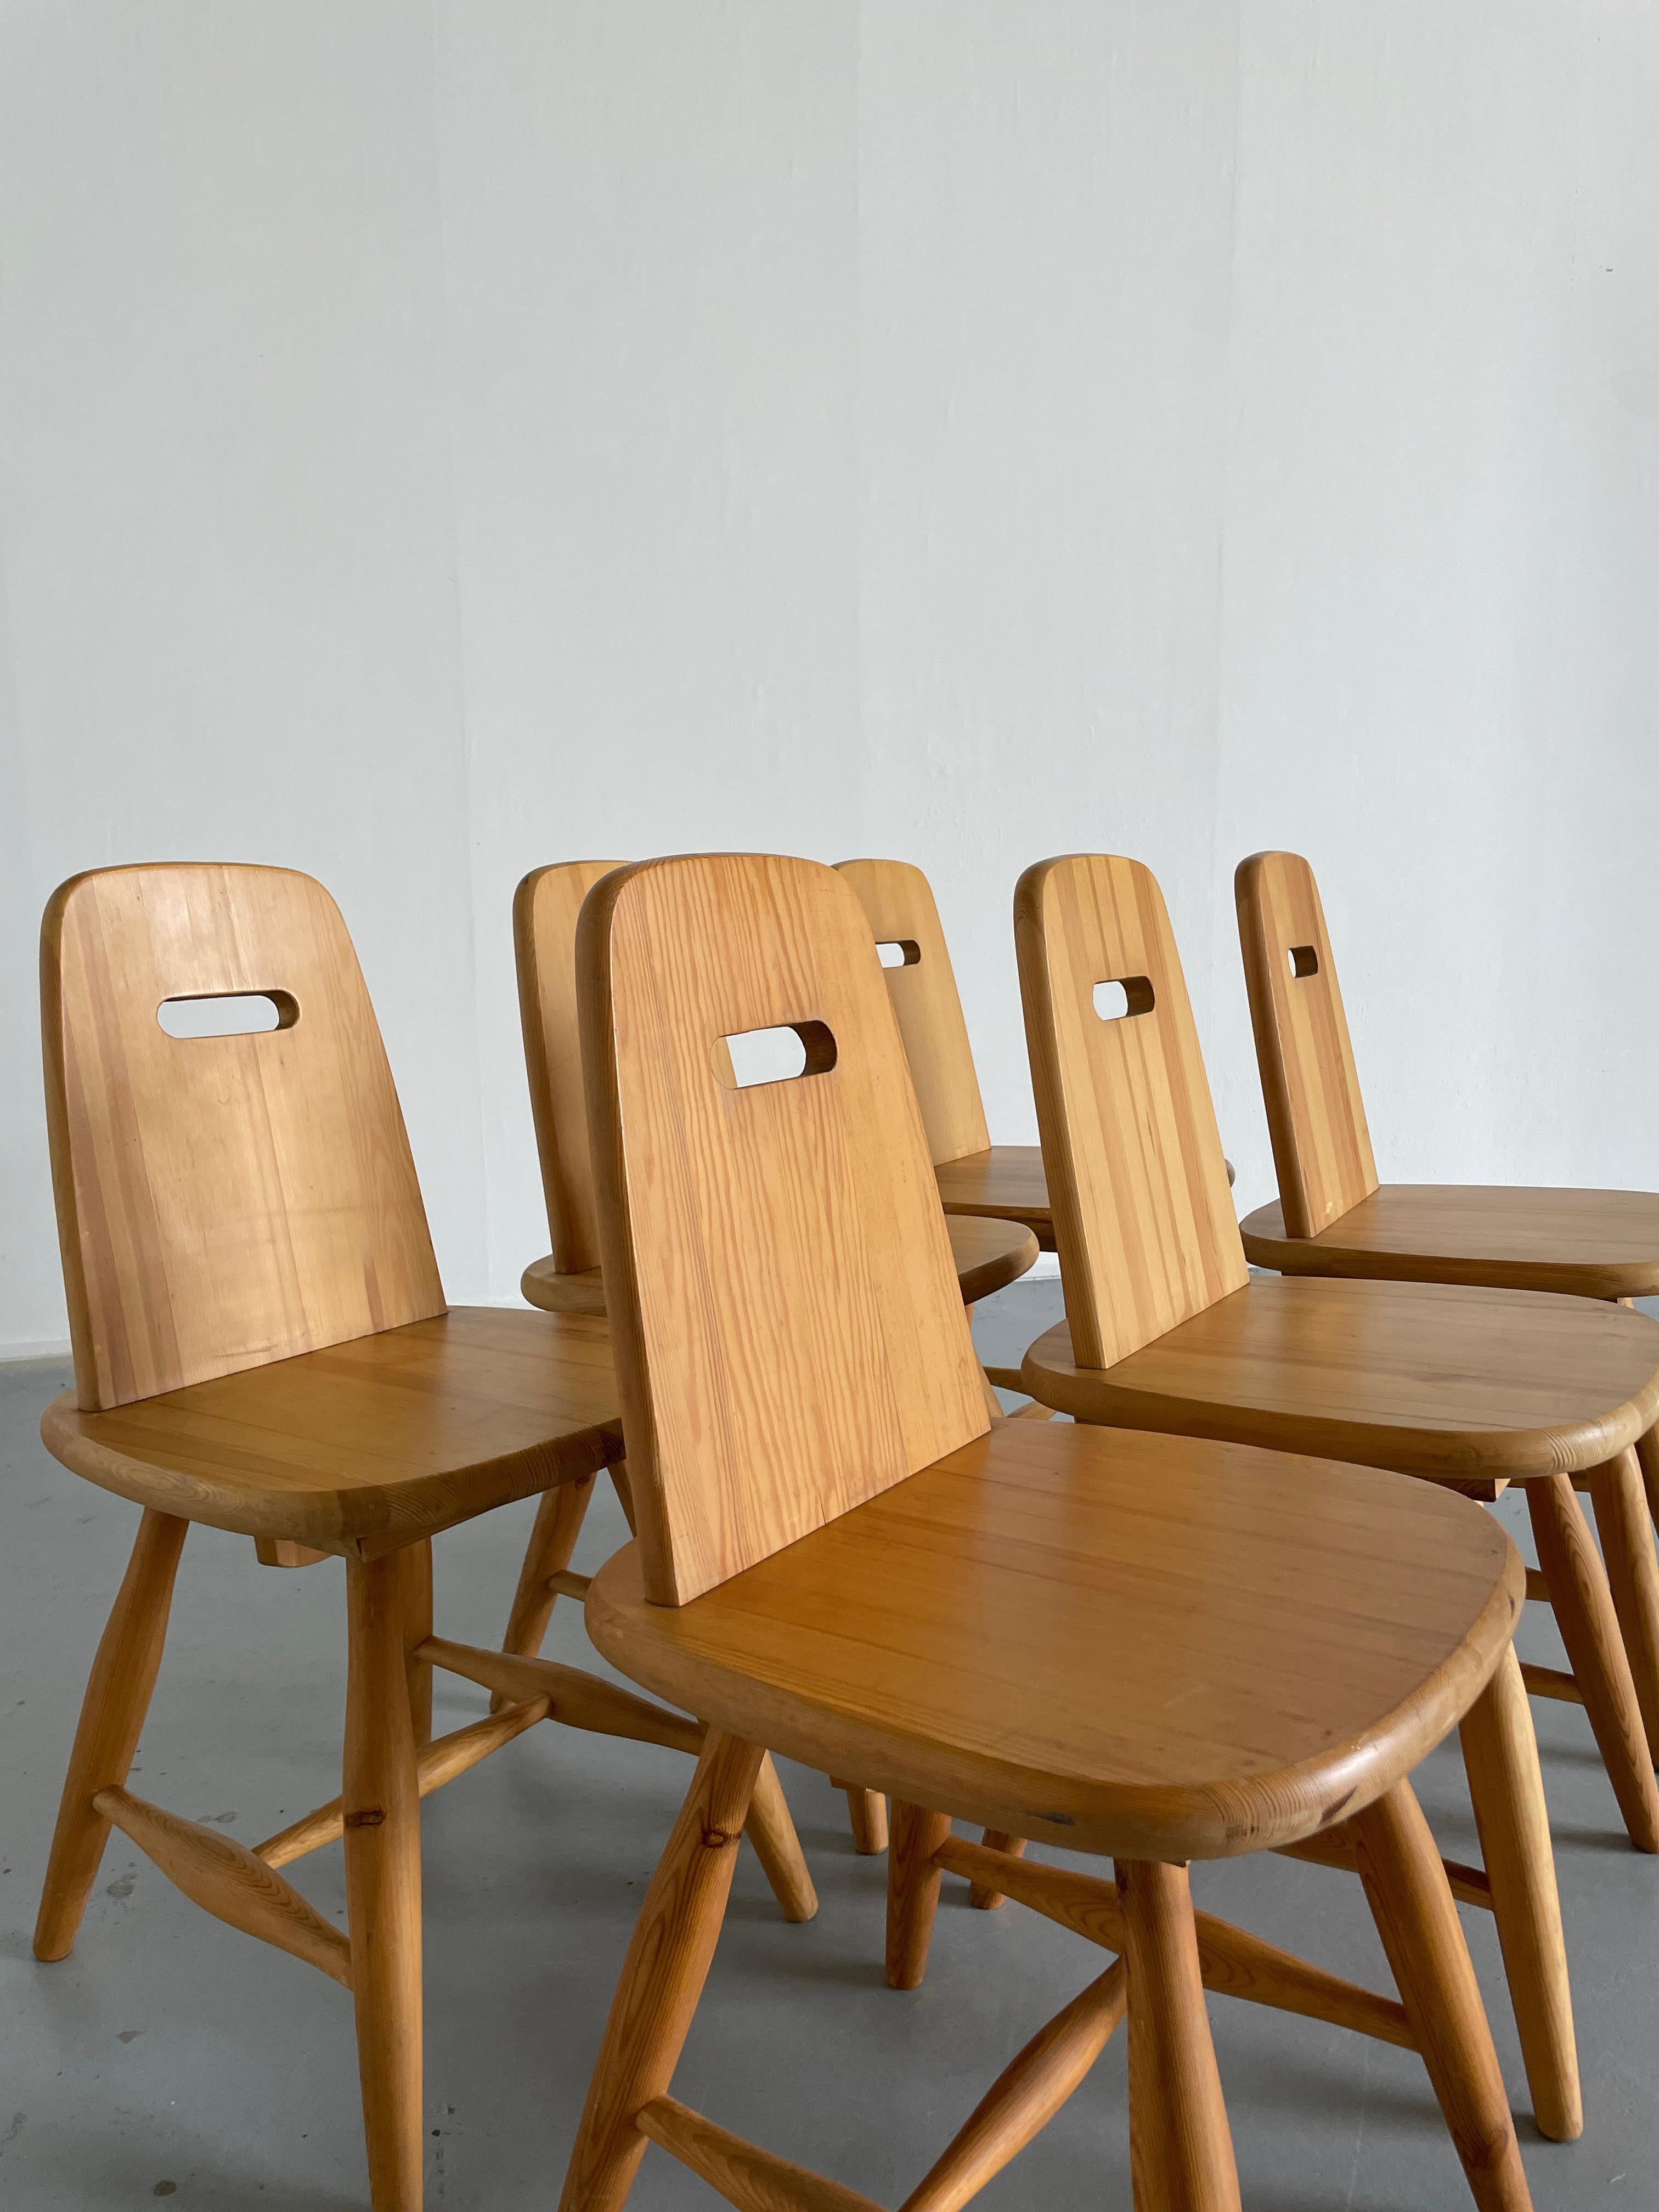 Set of 6 Eero Aarnio 'Pirtti' Wooden Dining Chairs in Solid Pine for Laukaan Puu 2